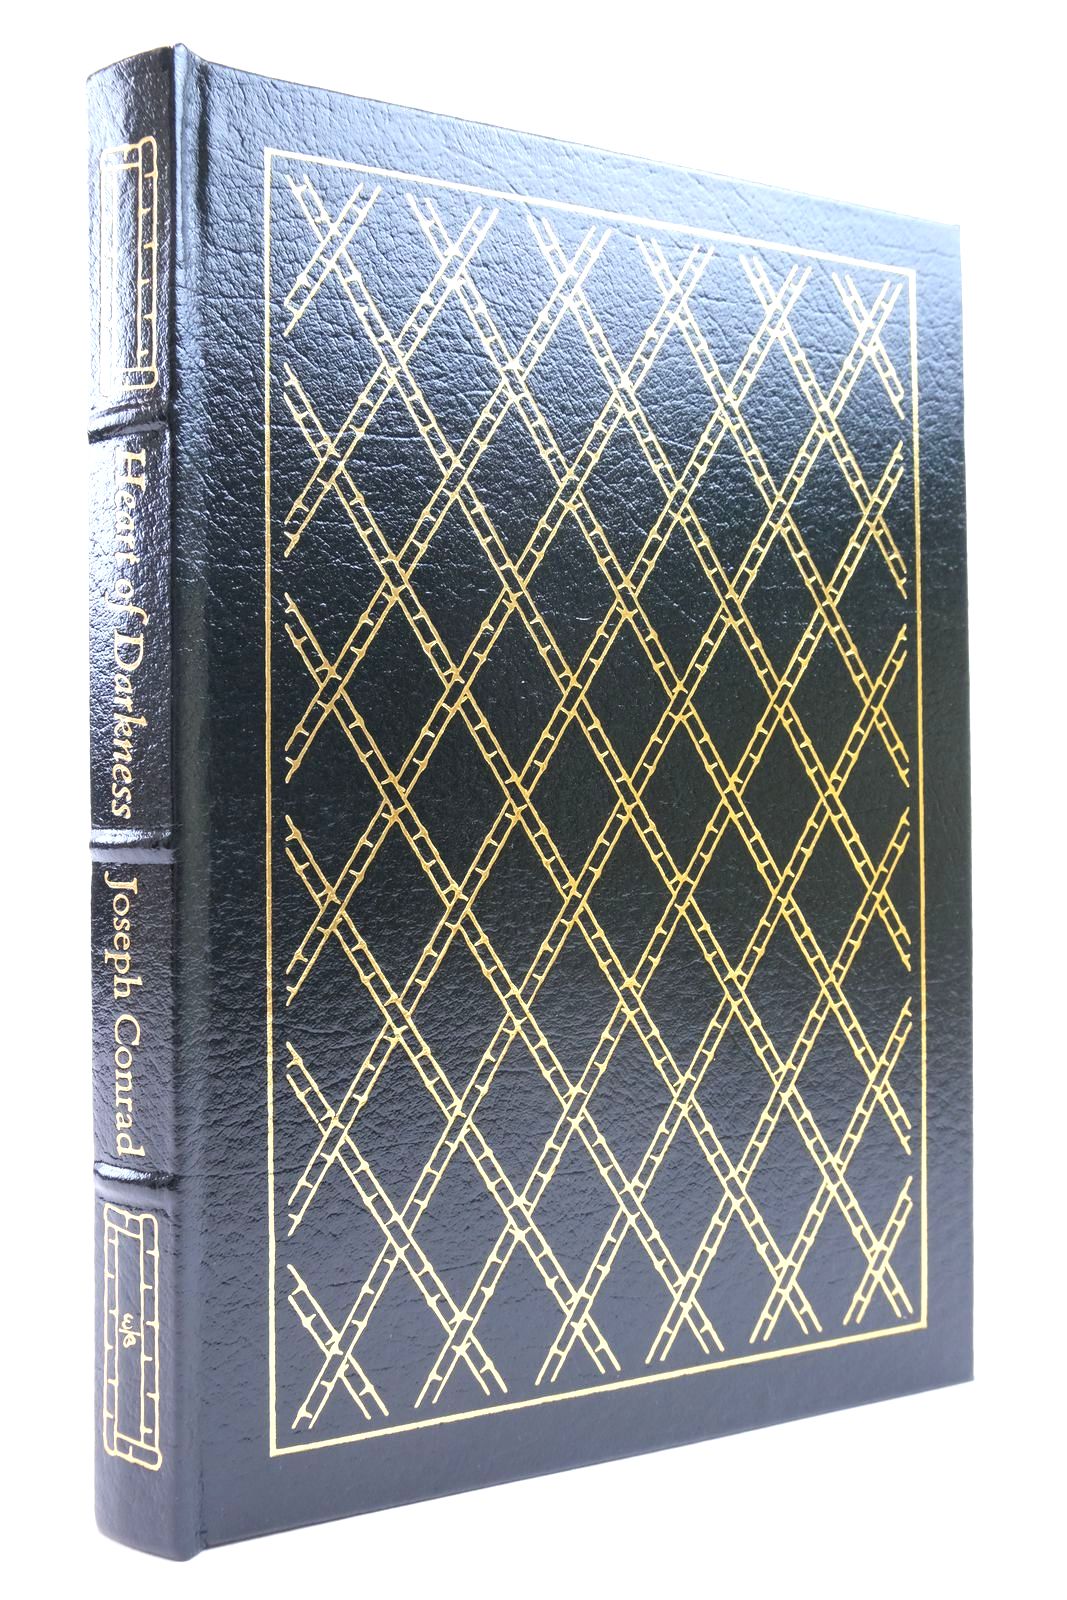 Photo of HEART OF DARKNESS written by Conrad, Joseph Gurko, Leo illustrated by Shore, Robert published by Easton Press (STOCK CODE: 2140002)  for sale by Stella & Rose's Books